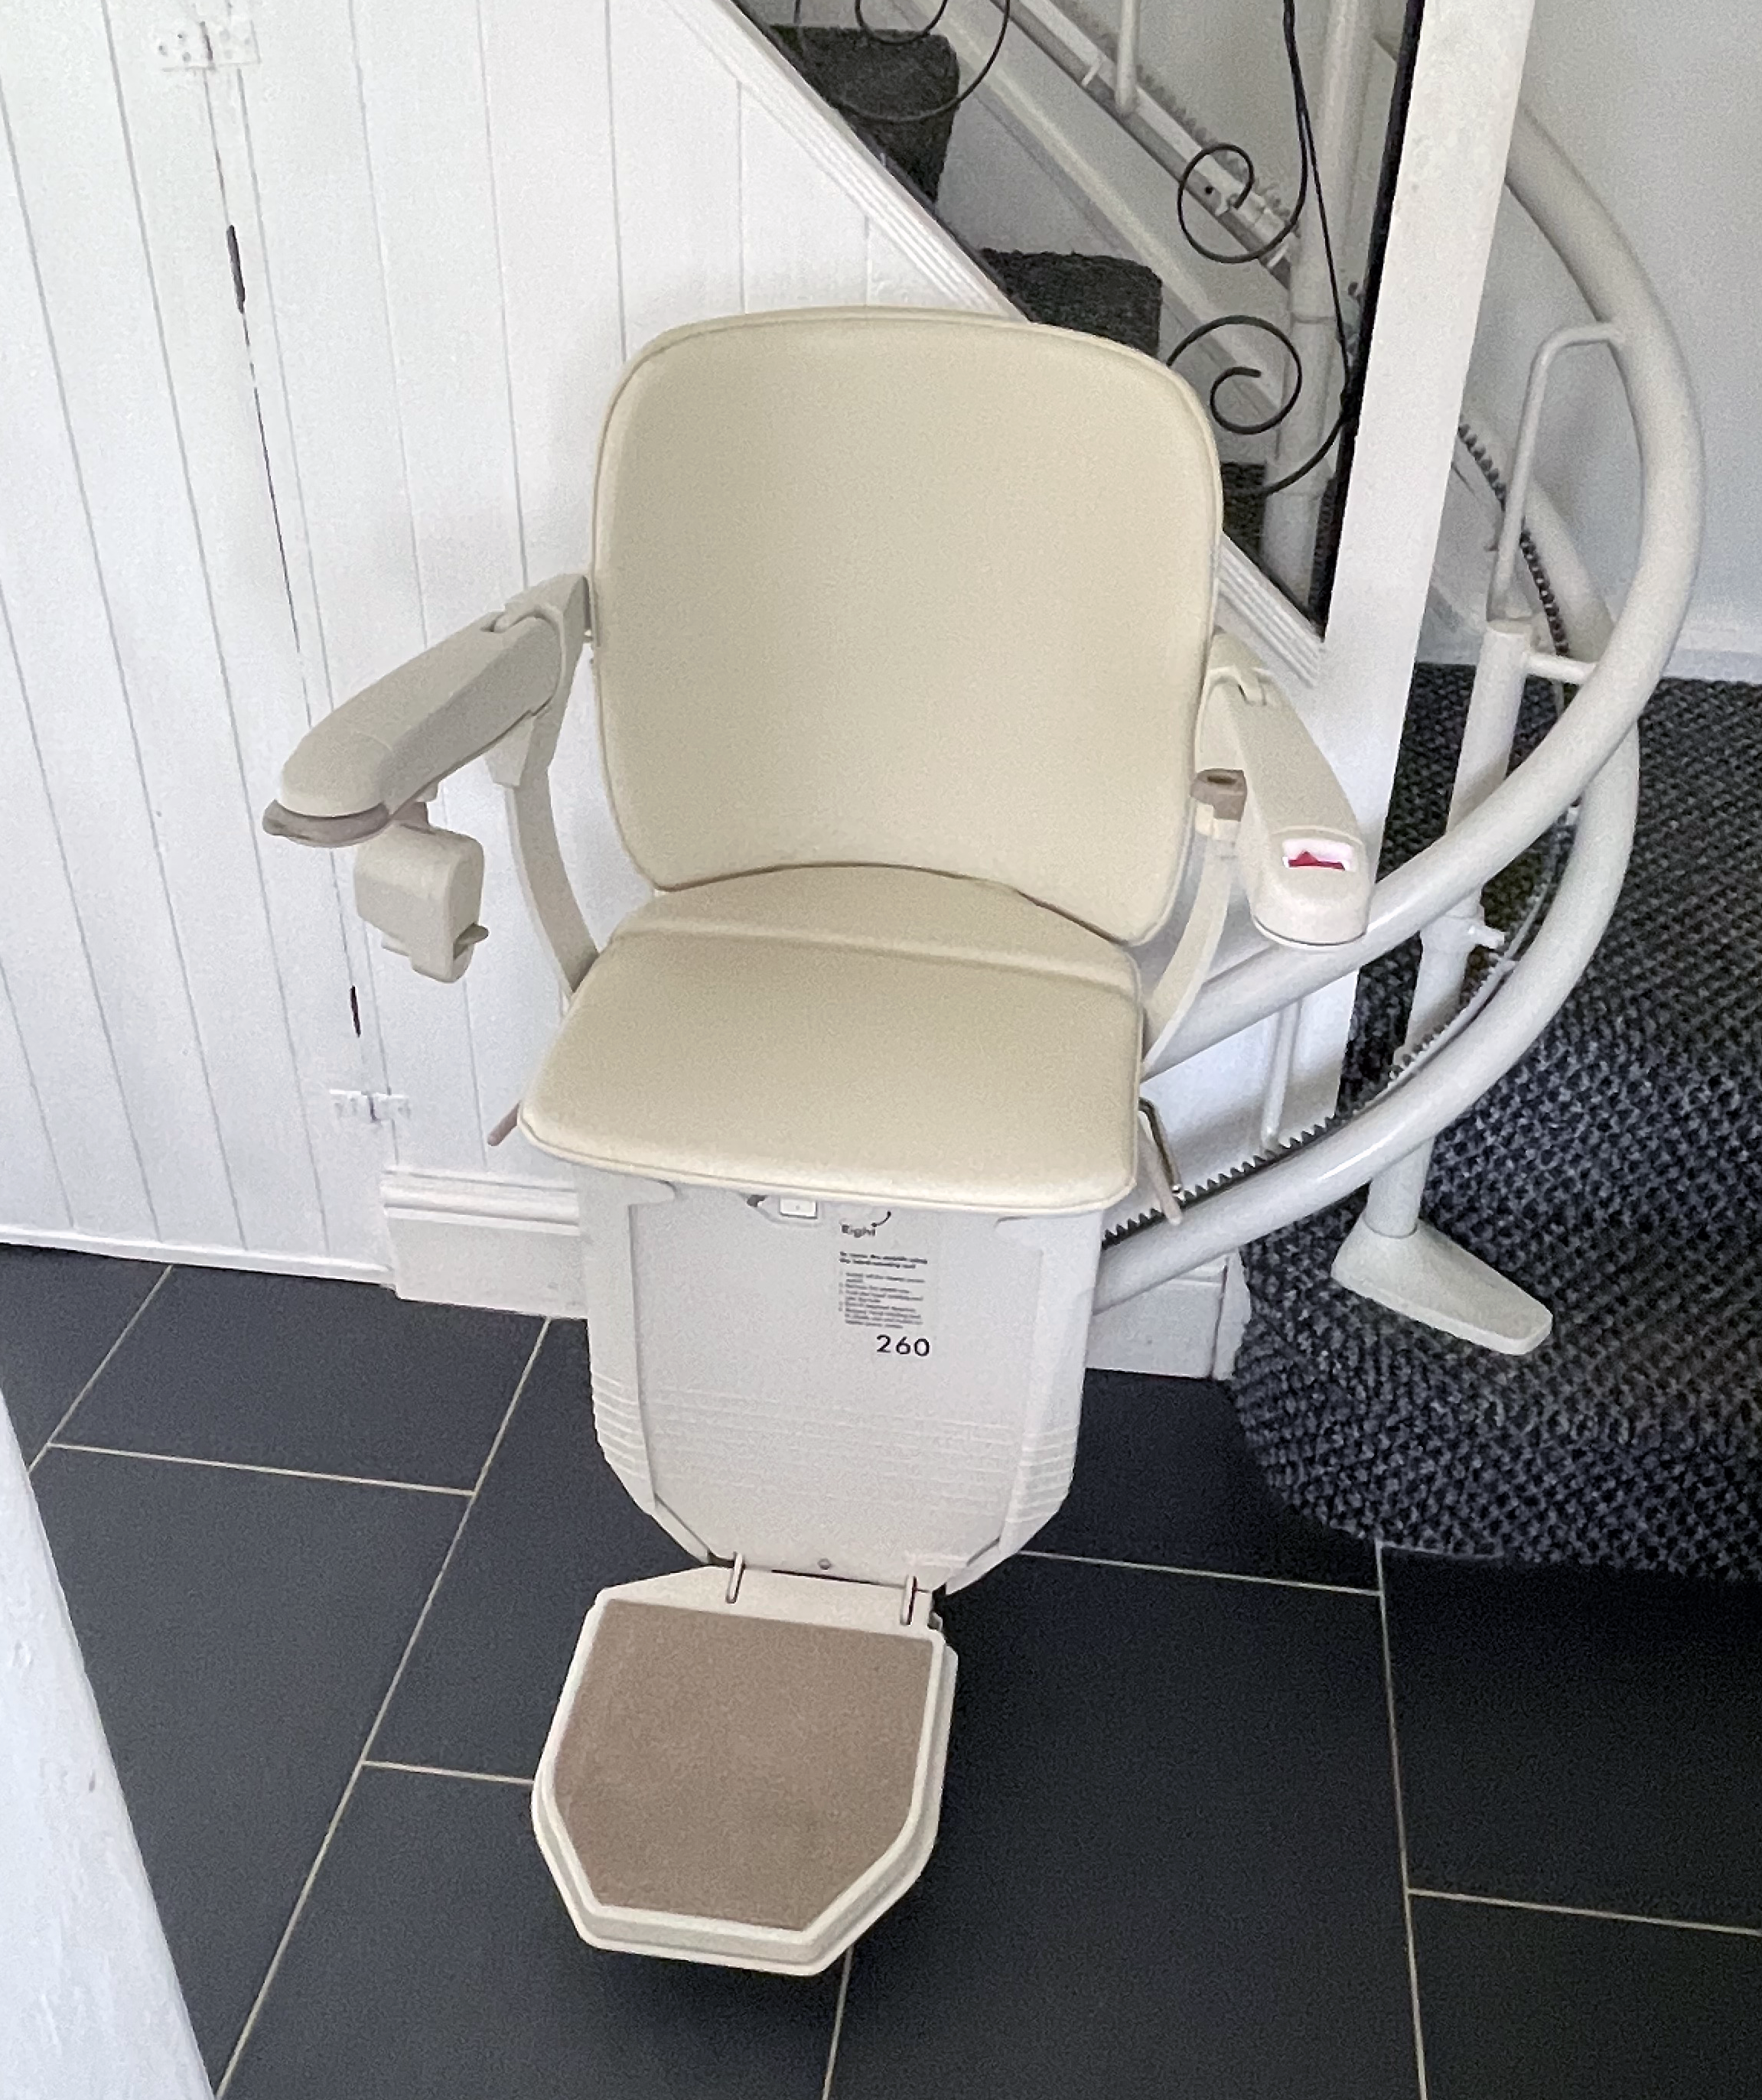 Stannah Curved Stairlift